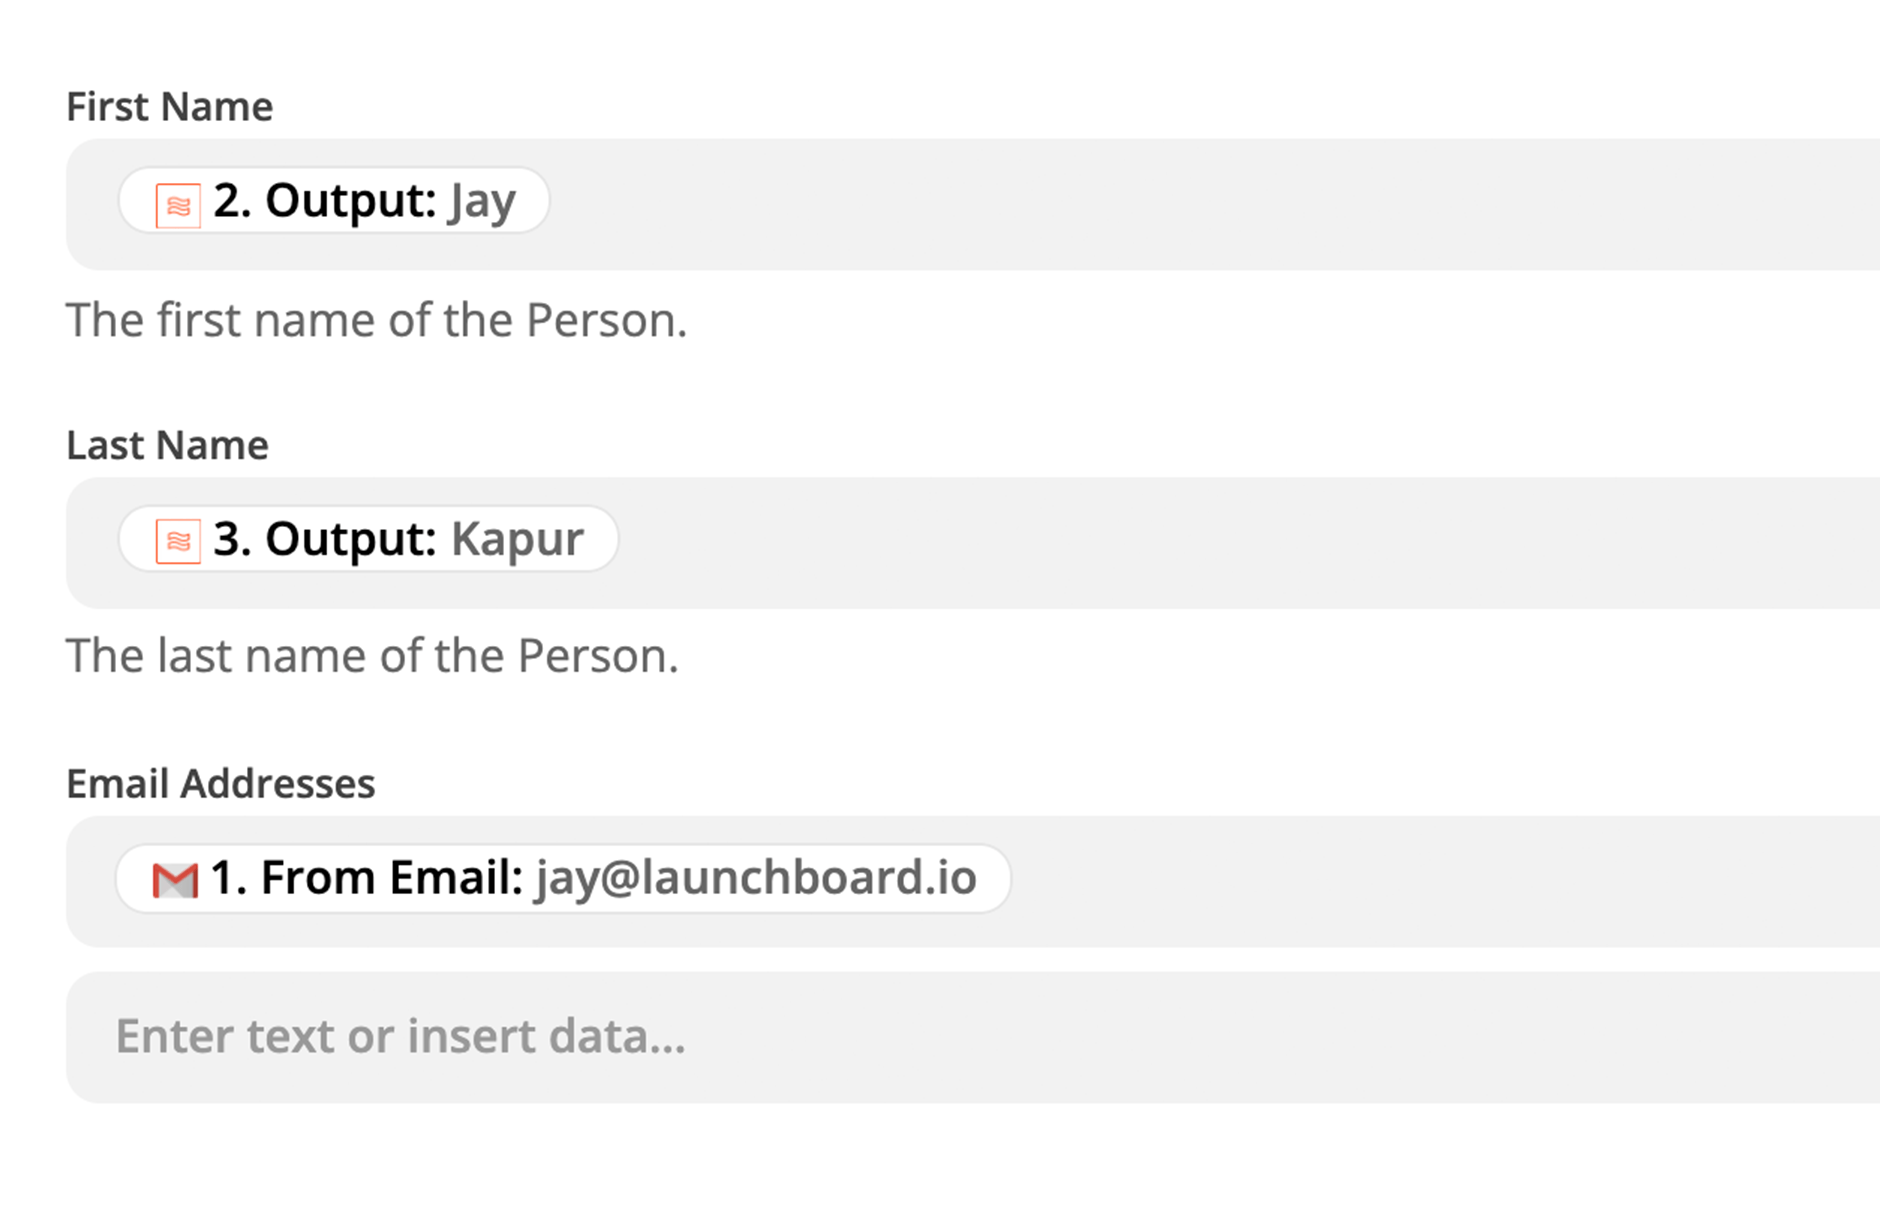 An action step in Zapier is being configured to create a new person record using data from step 1 of the Zap